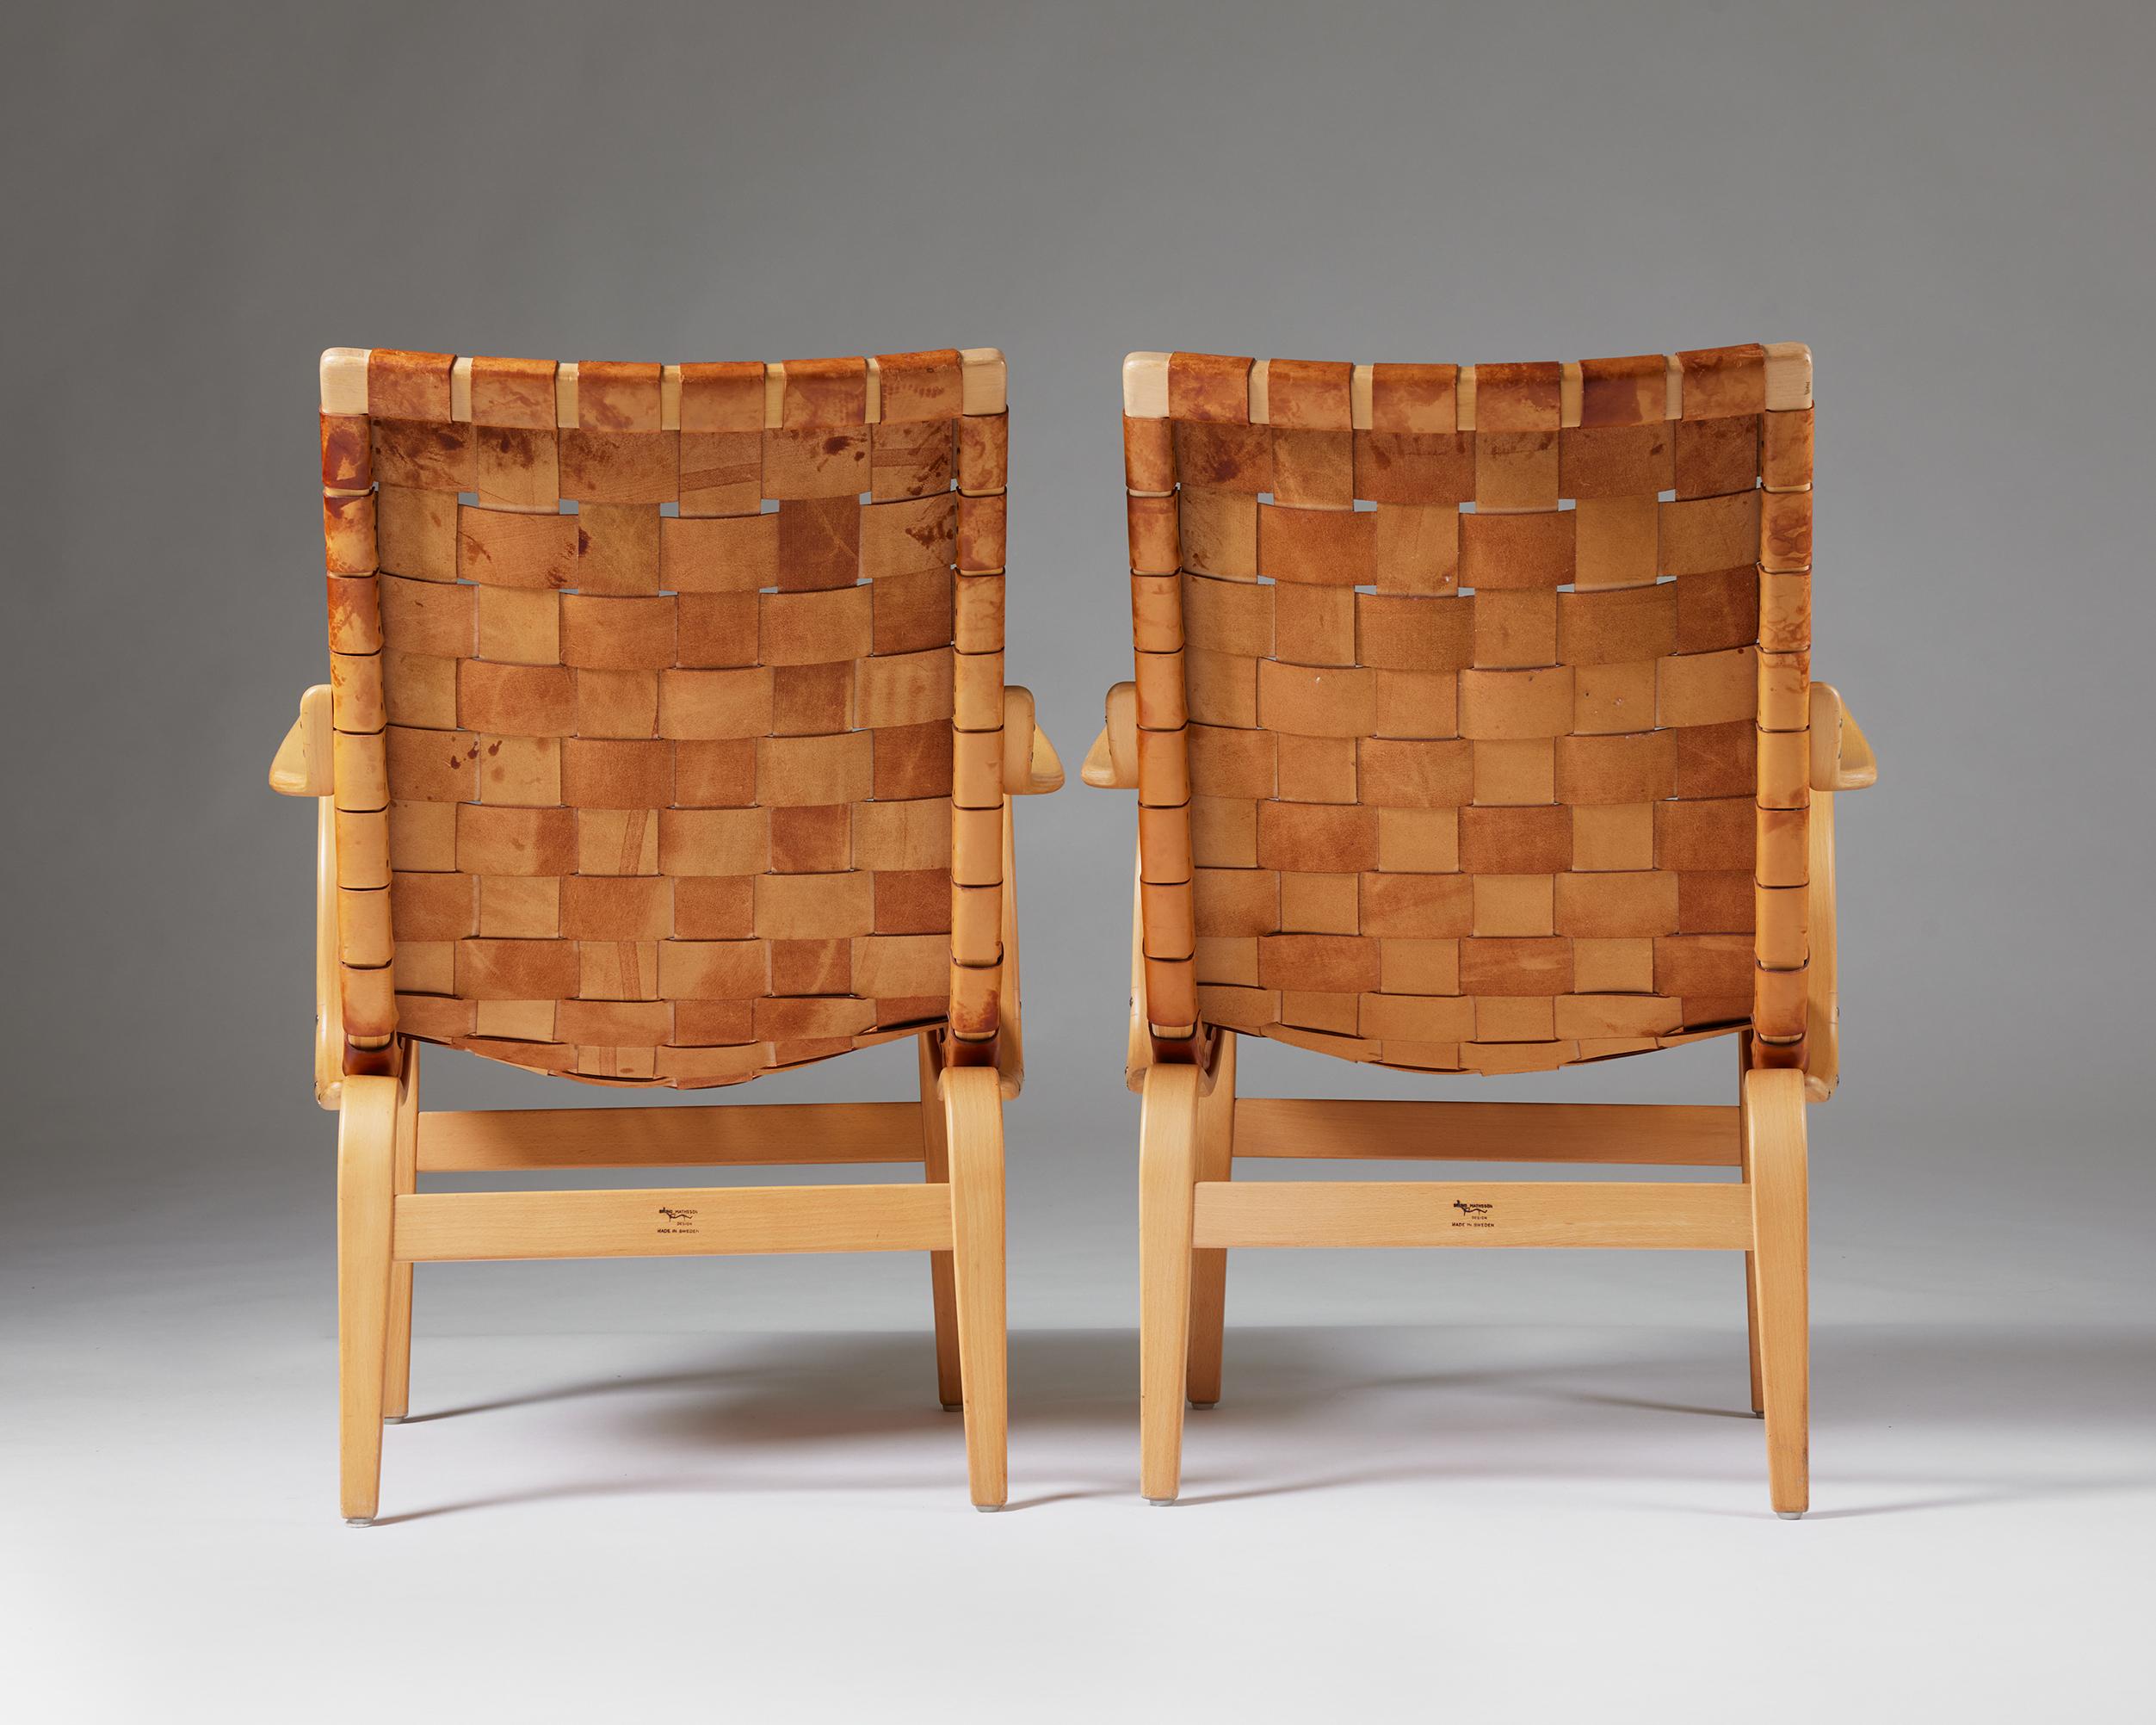 Pair of armchairs ‘Eva’ designed by Bruno Mathsson for Karl Mathsson, Swedish For Sale 2